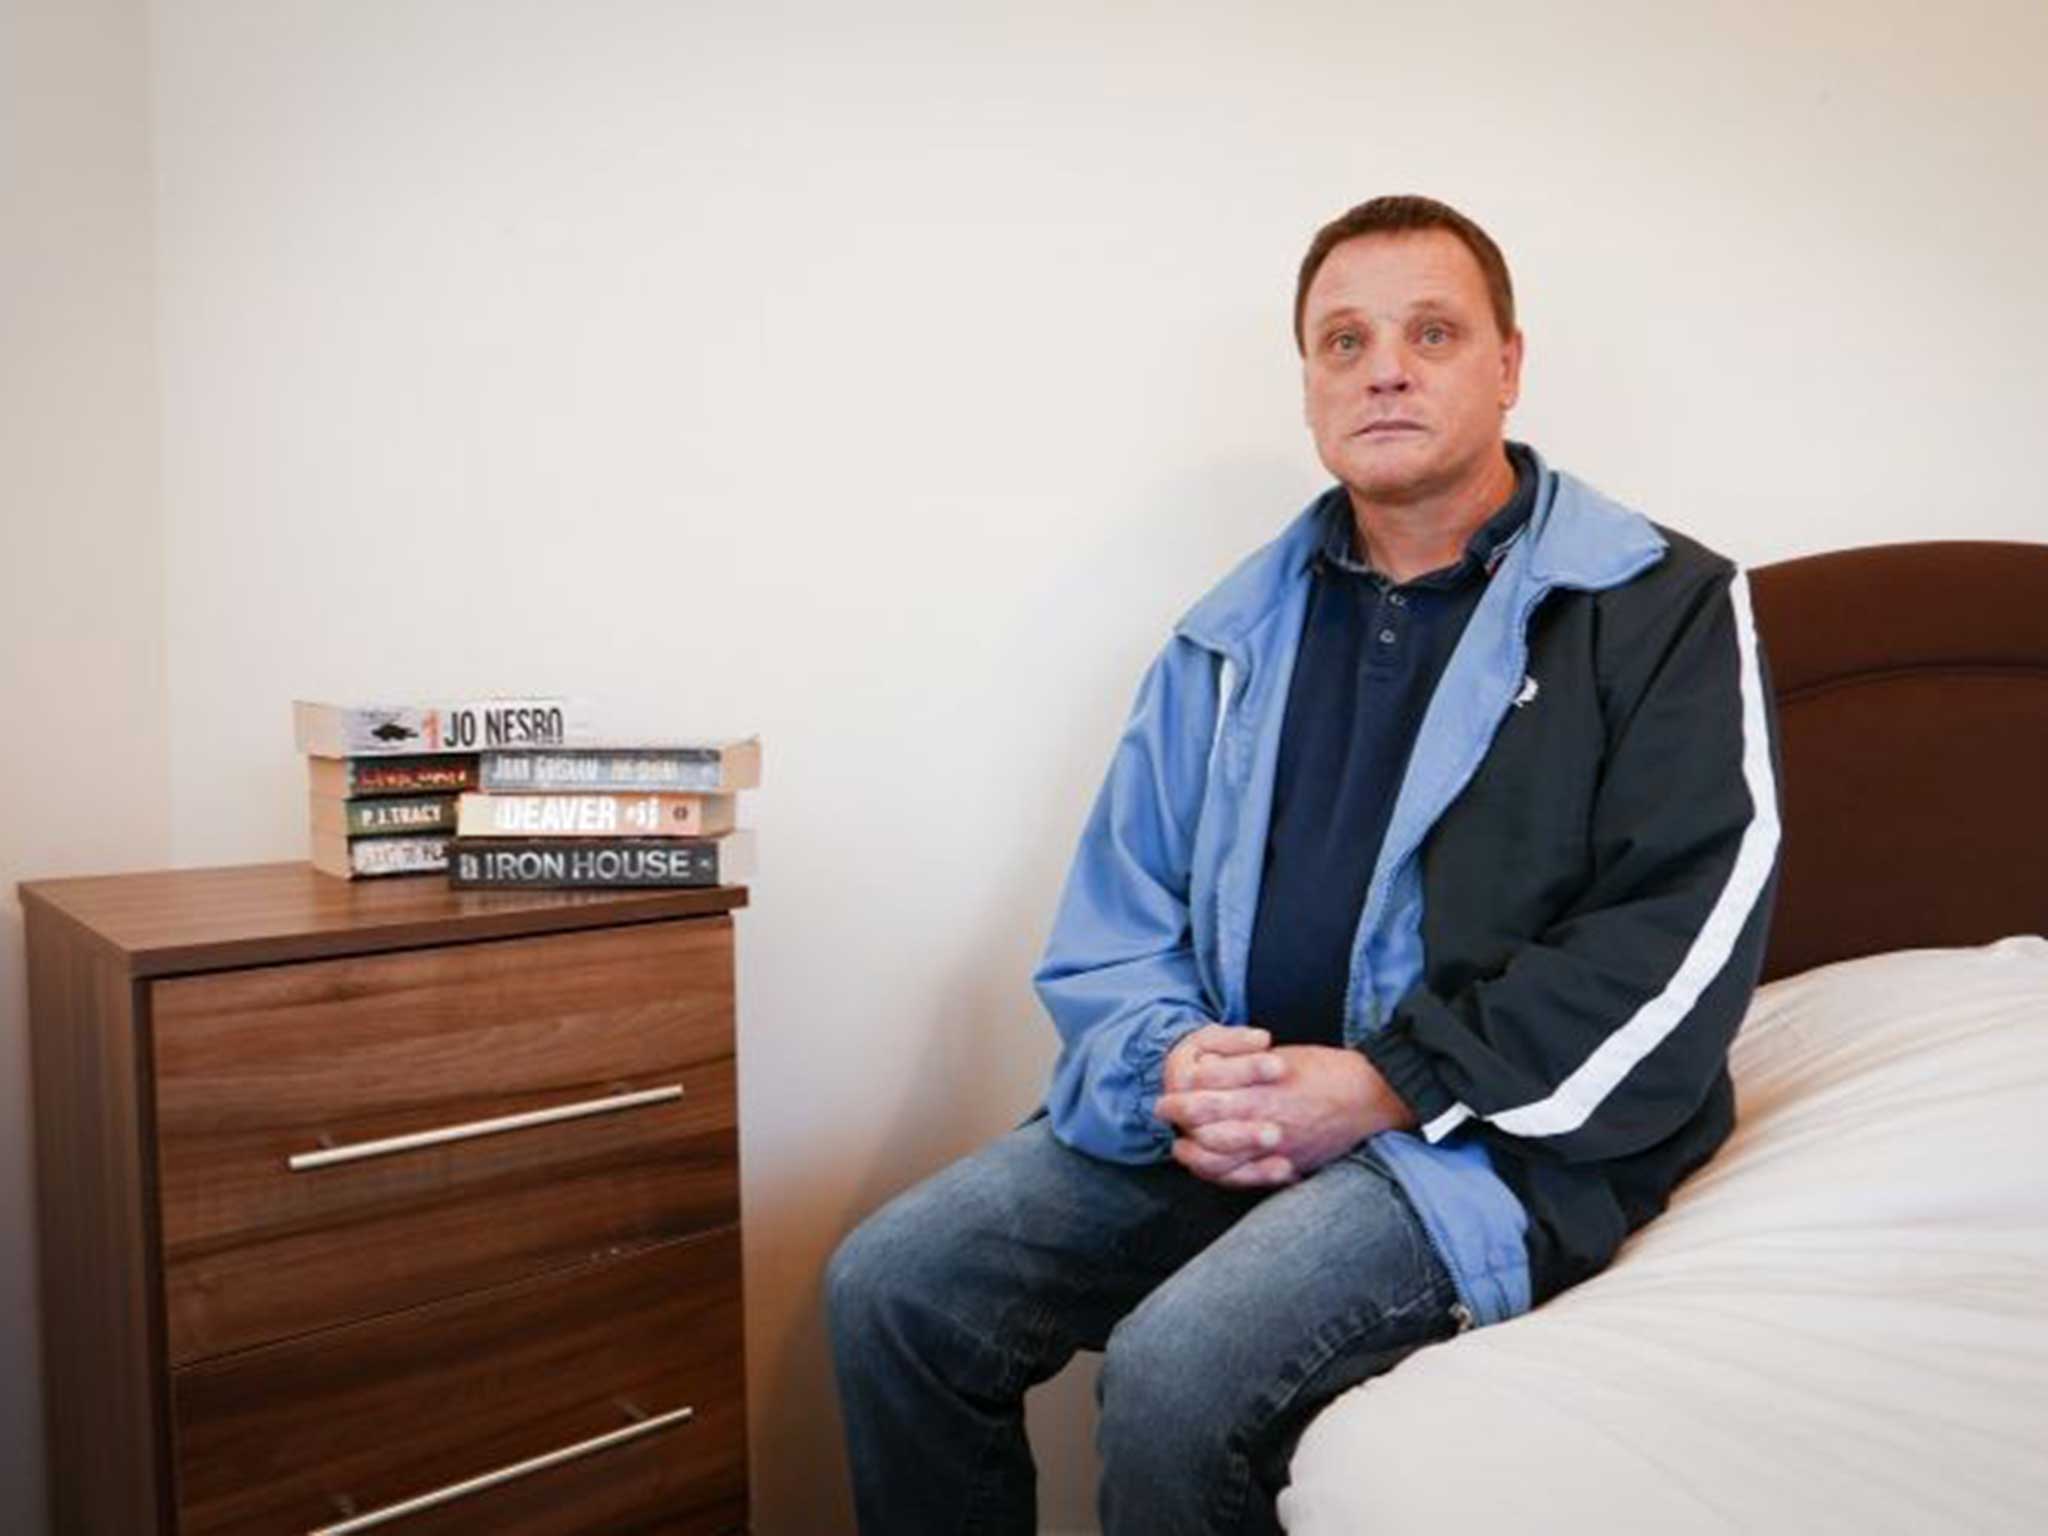 Louis Boyle is a recovering alcoholic living in Bibby House in Gateshead